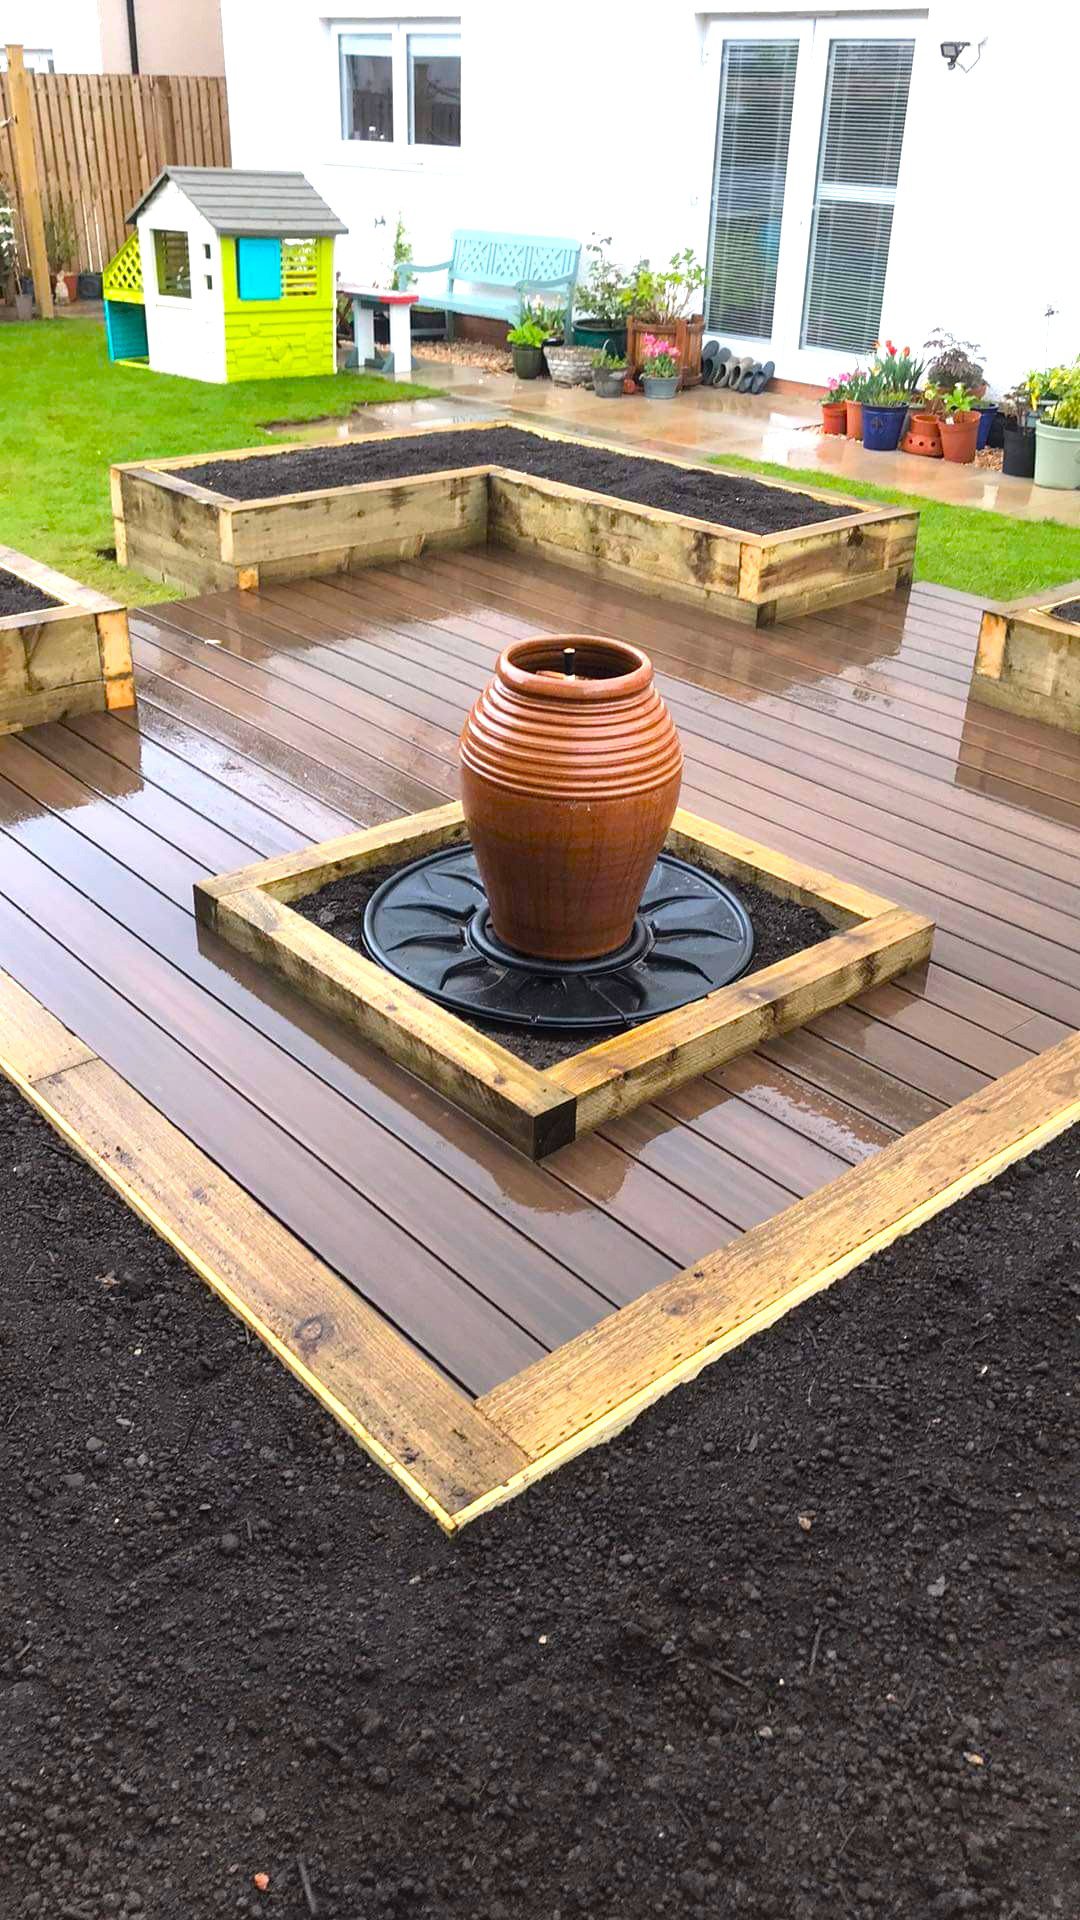 Raised bed with composit decking and water feature 7